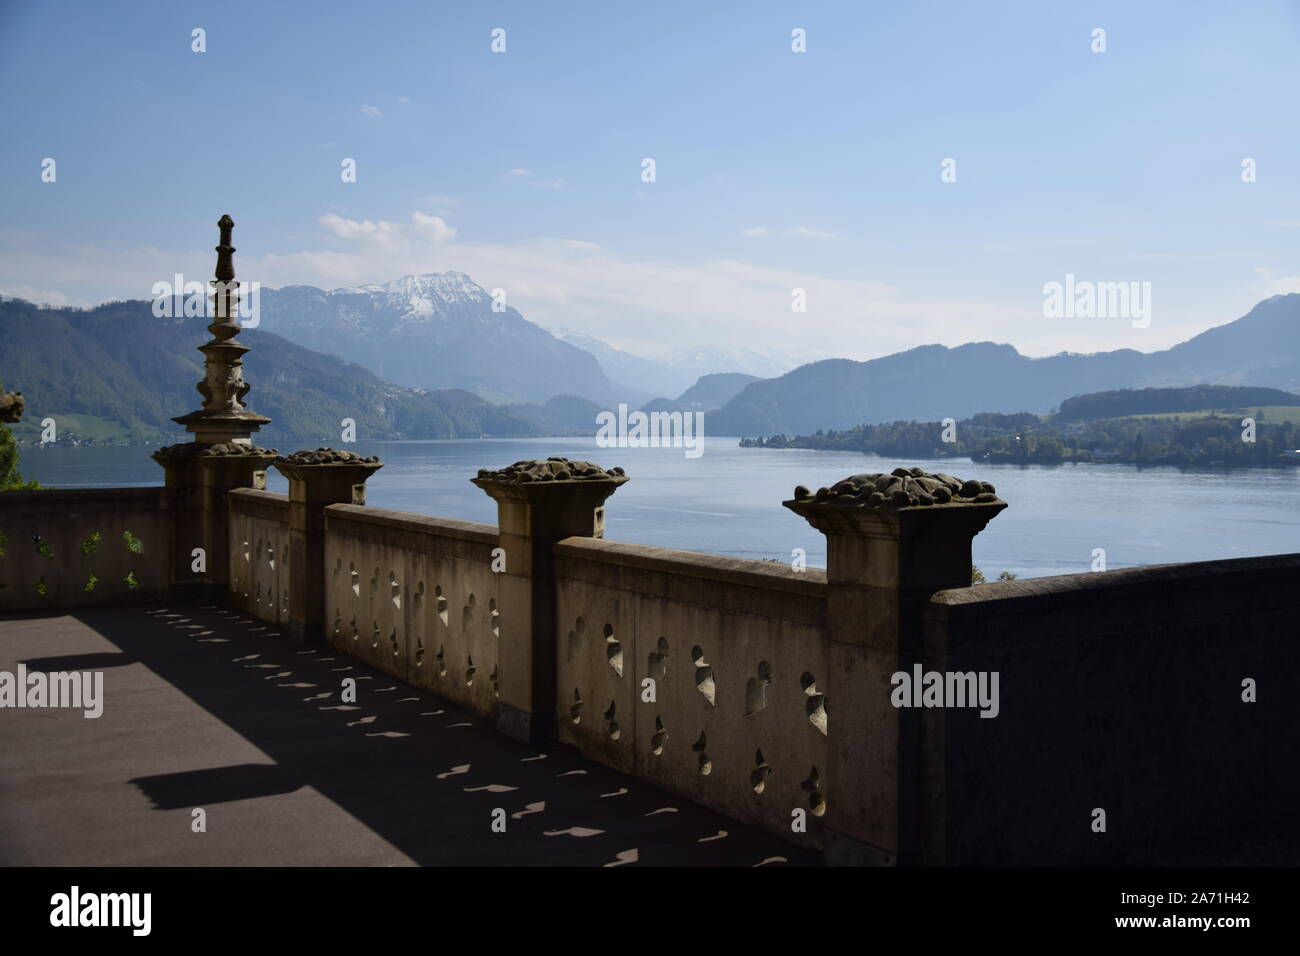 Rail at Schloss Meggenhorn with a view on the Lake of Lucerne and the alps in the back with the queen of the mountains Rigi dominating Stock Photo